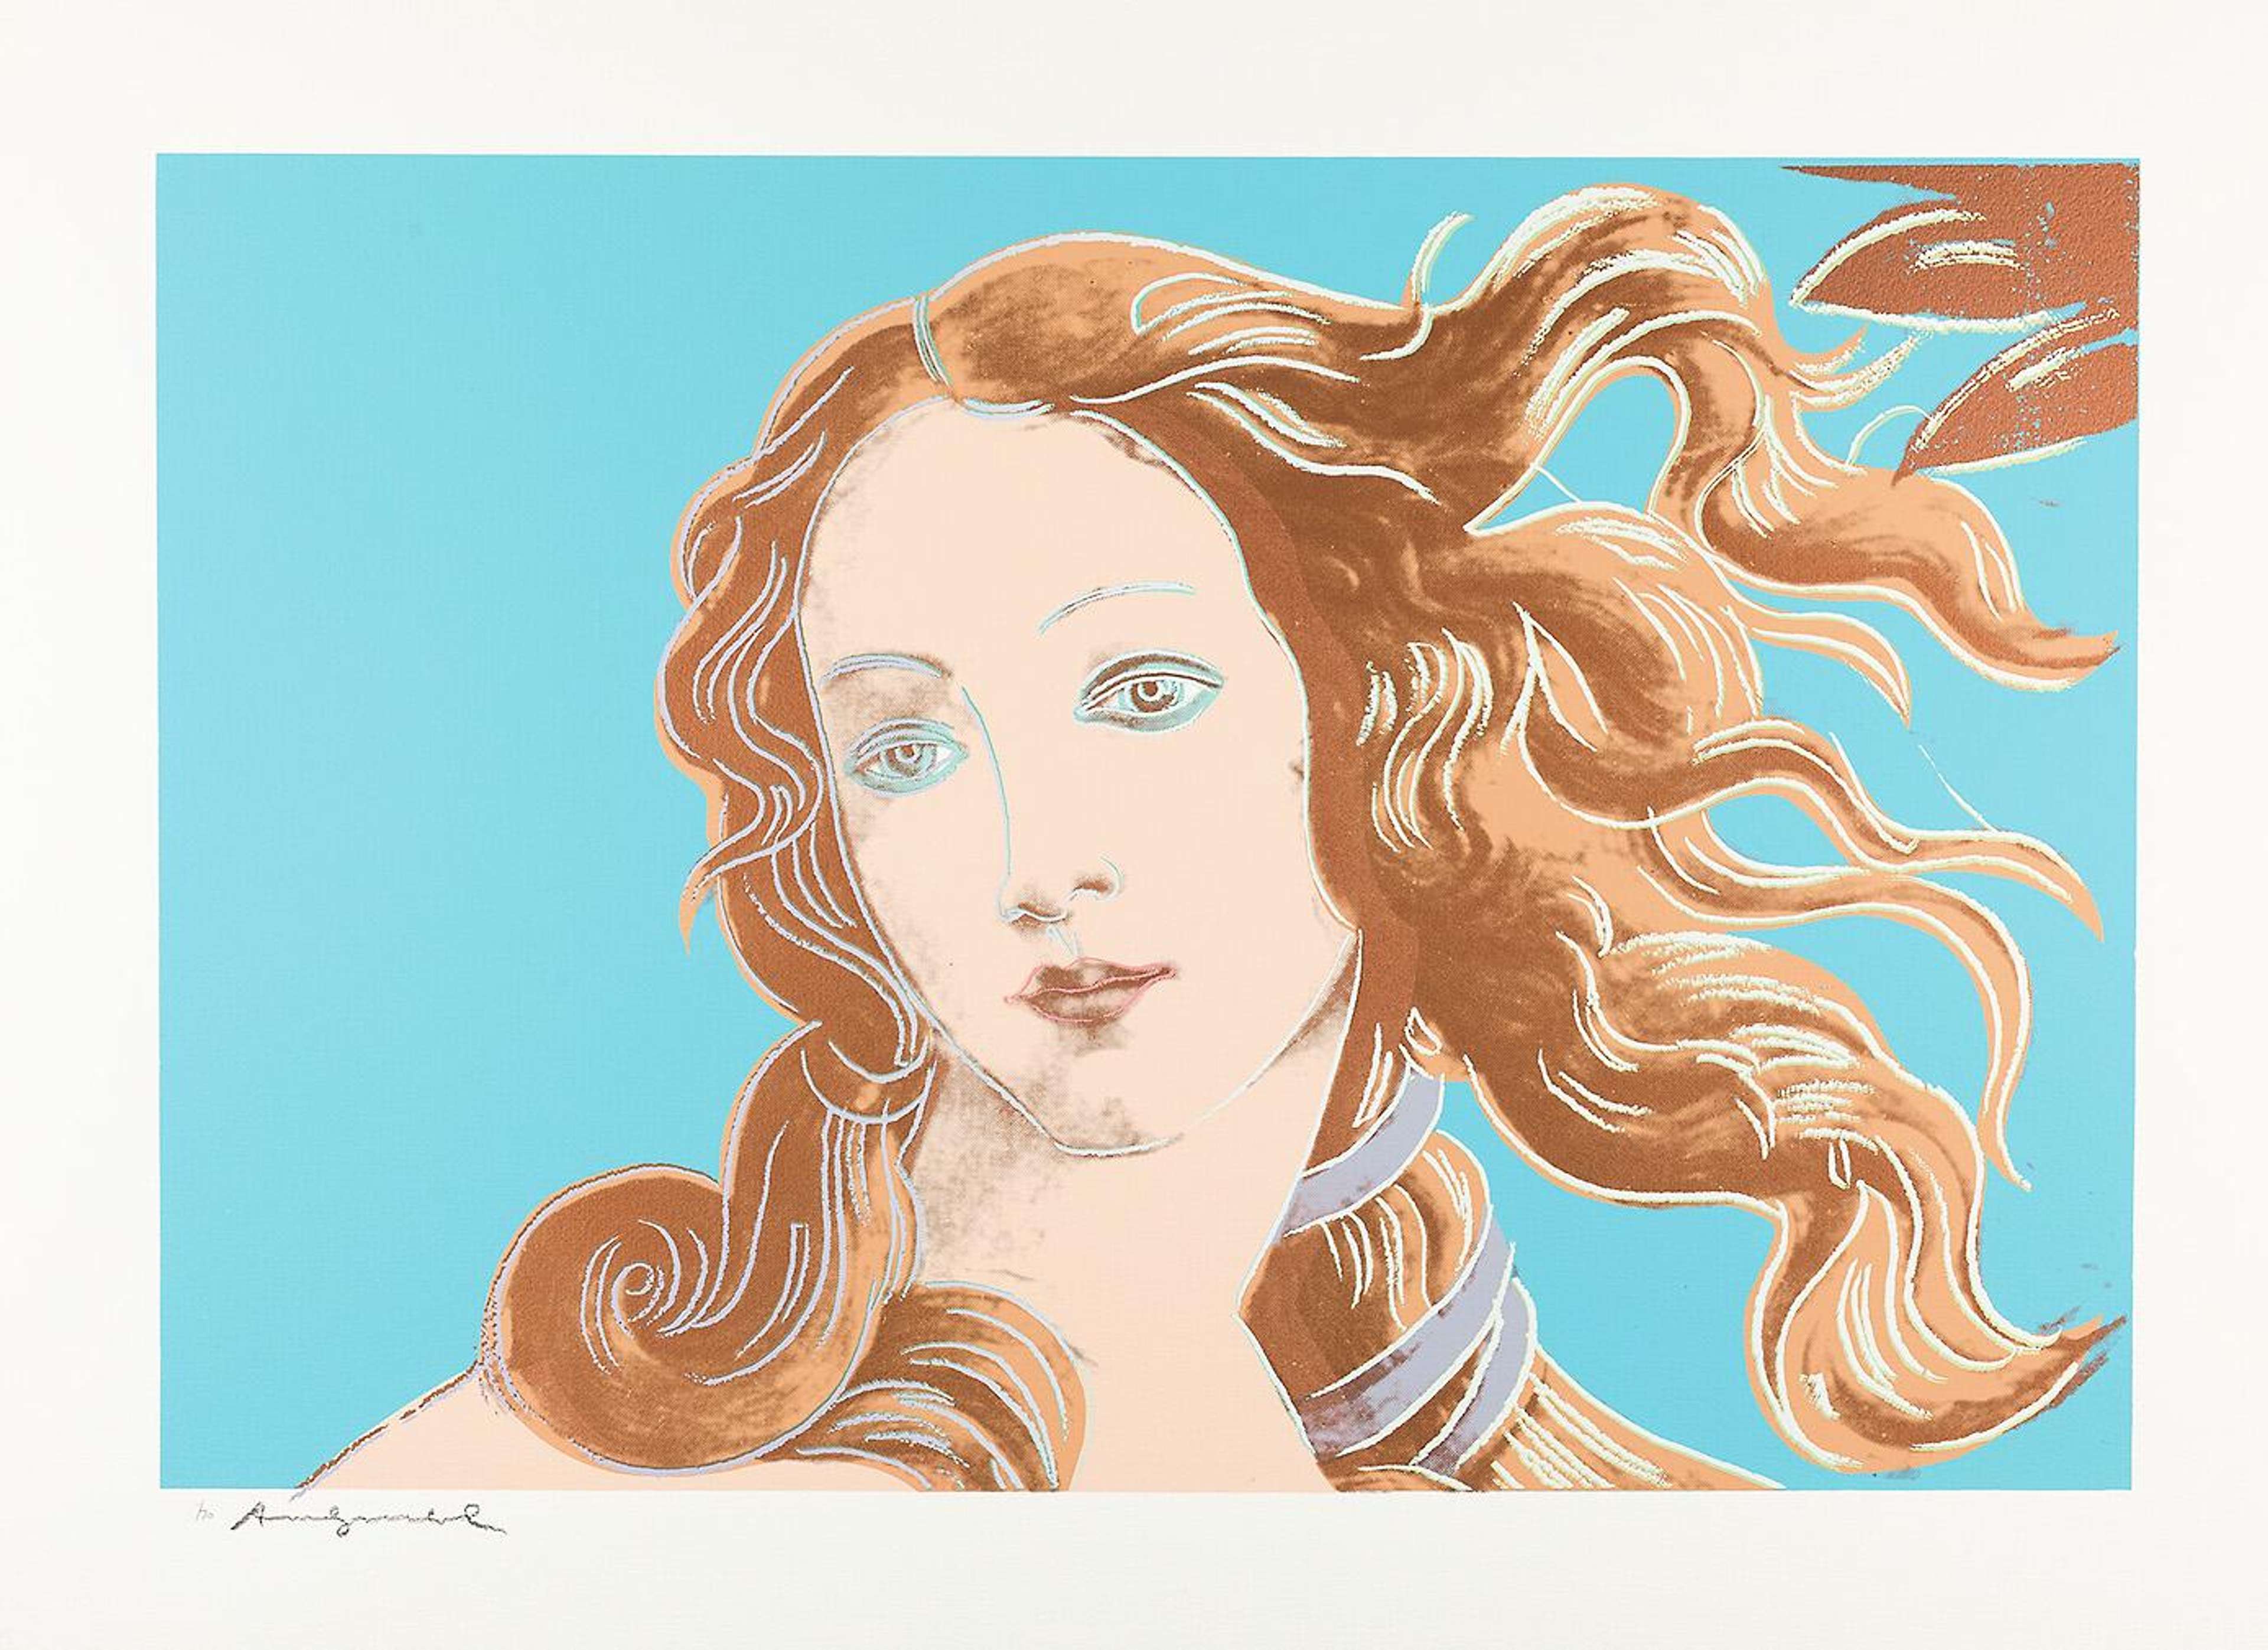 A screenprint by Andy Warhol depicting a close-up portrait of Sandro Botticelli's Venus